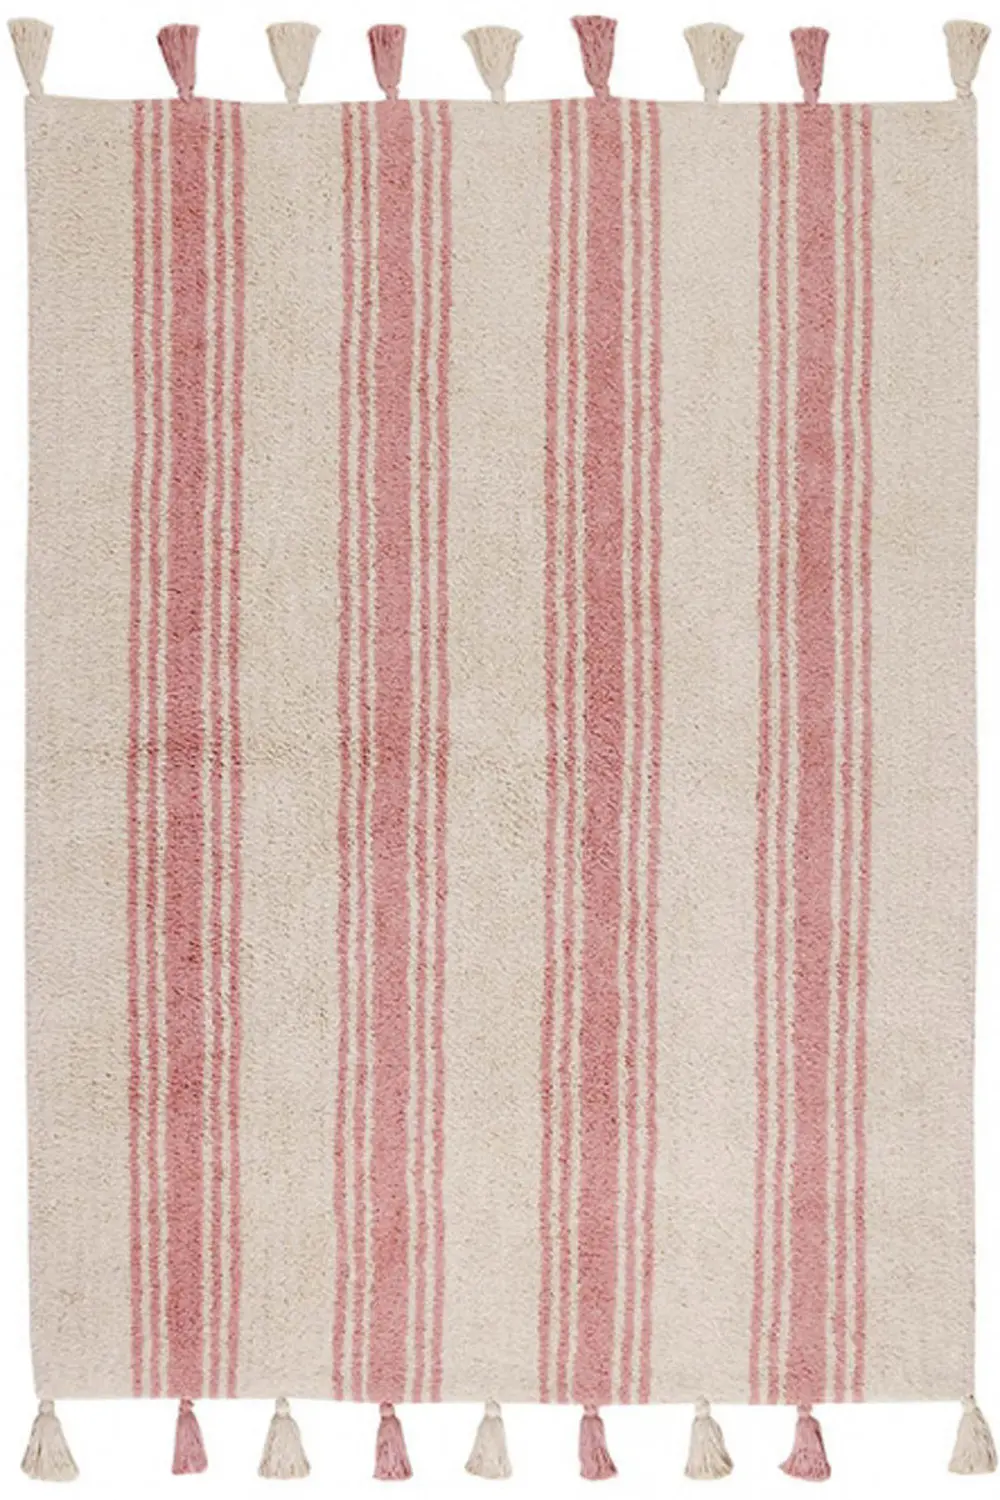 C-ST-CORALPINK 4 x 5 Small Stripes Coral Pink Washable Rug-1